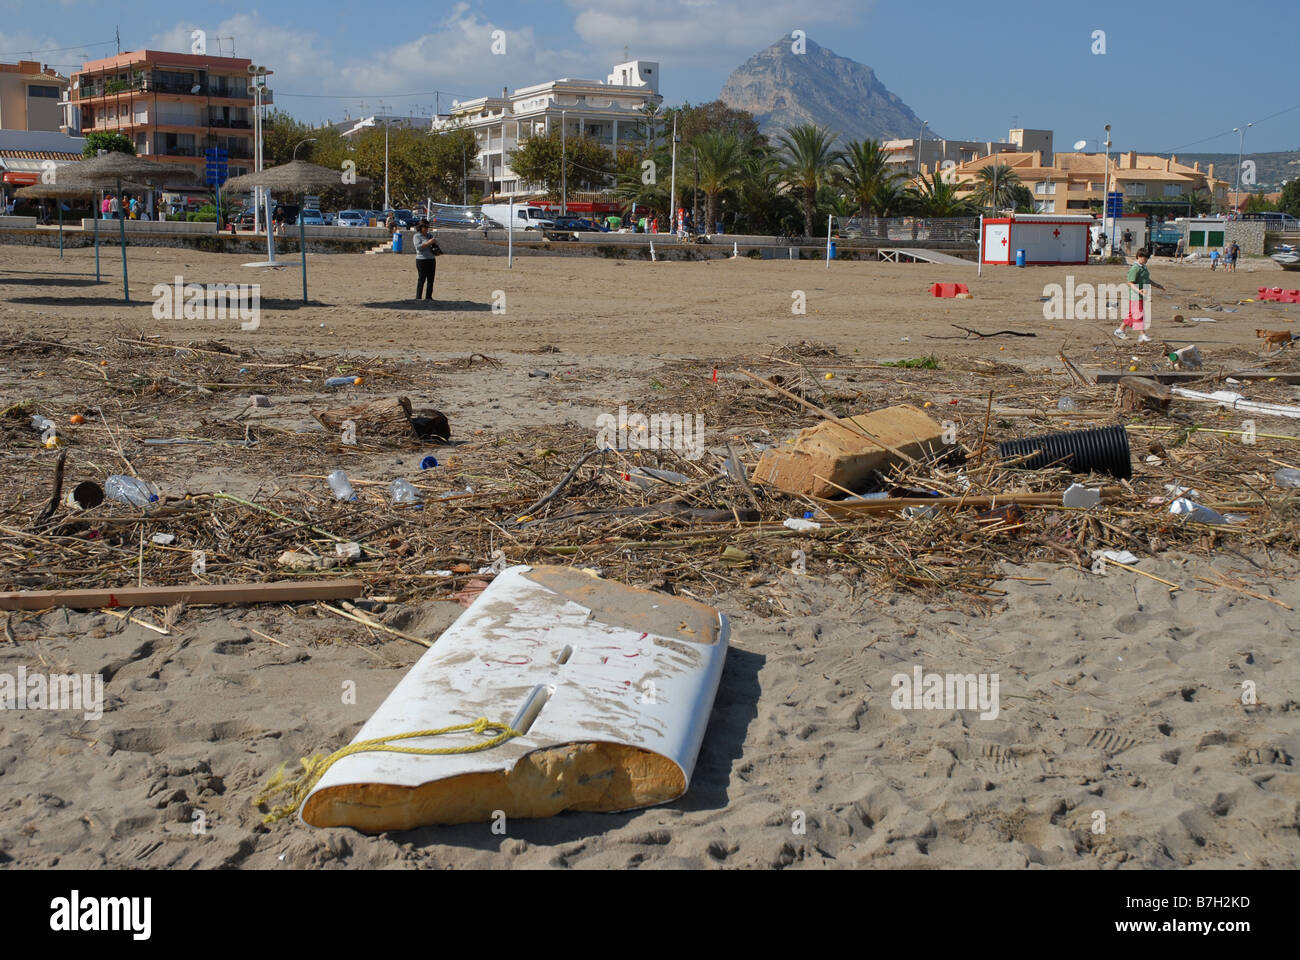 debris washed up on Playa Arenal after storm, Oct 2007, Javea, Alicante Province, Comunidad Valenciana, Spain Stock Photo